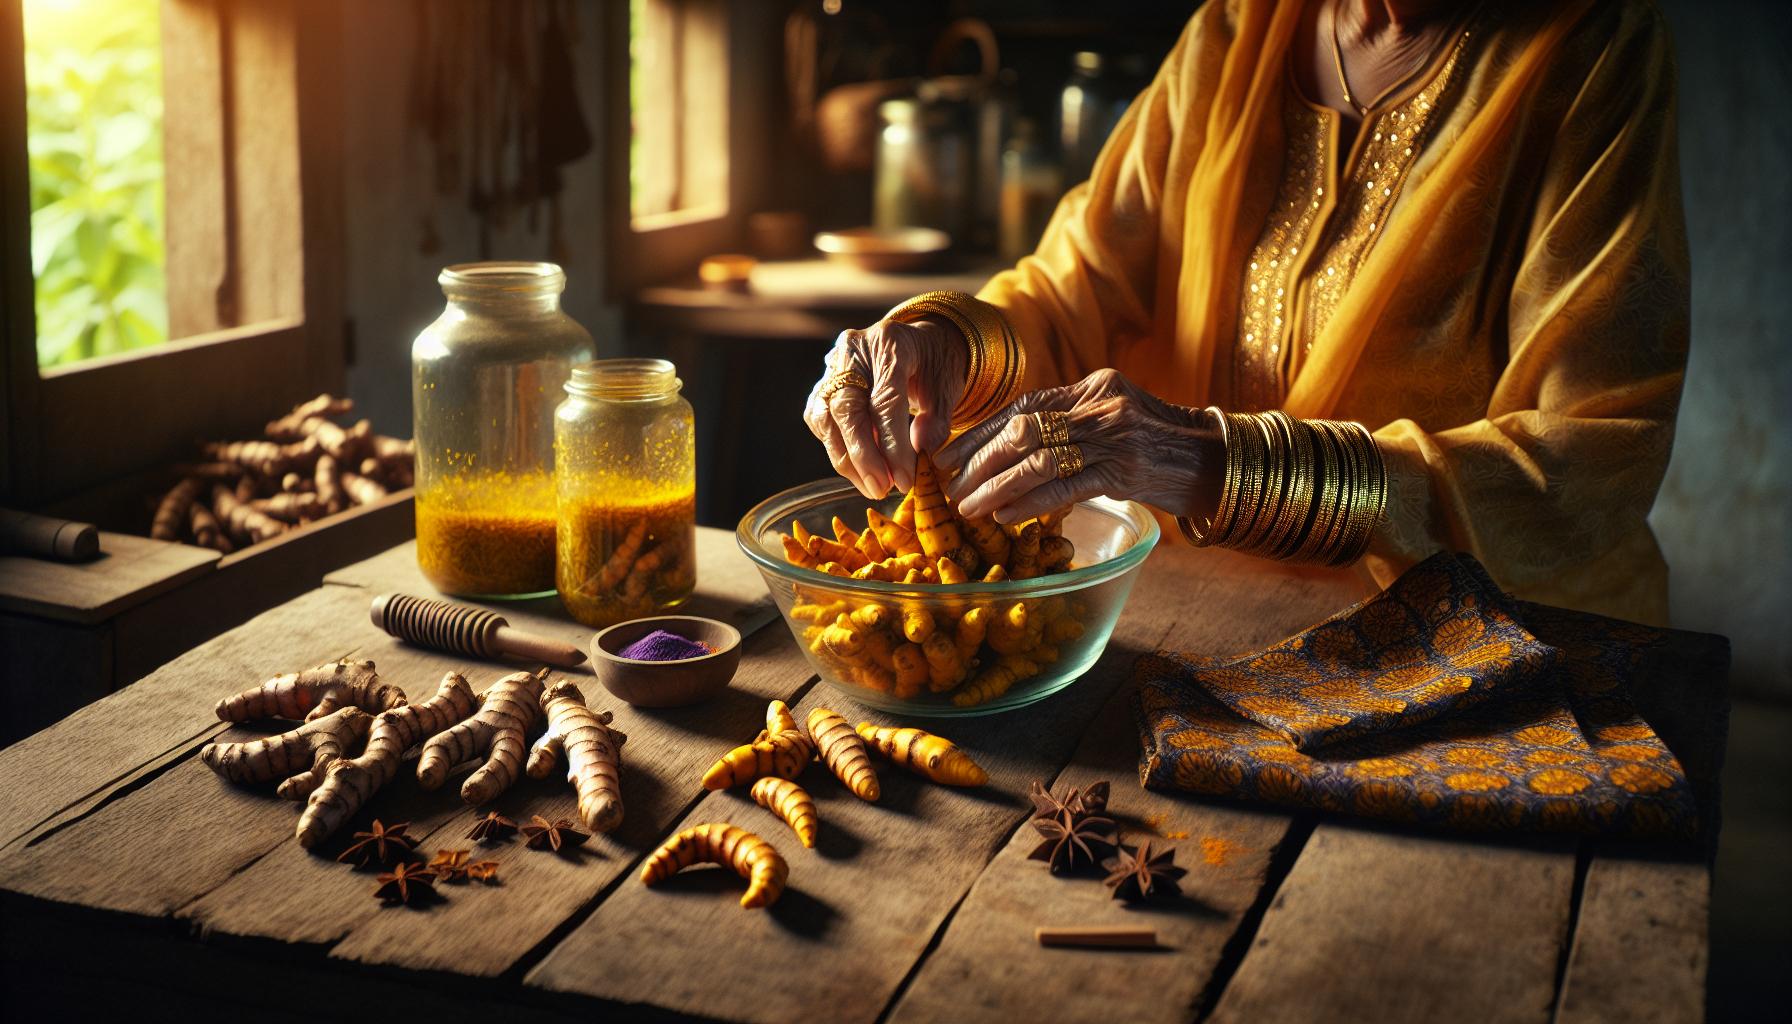 Unraveling the Heritage Recipe: Insight into Making Mothers' Fresh Turmeric Pickles